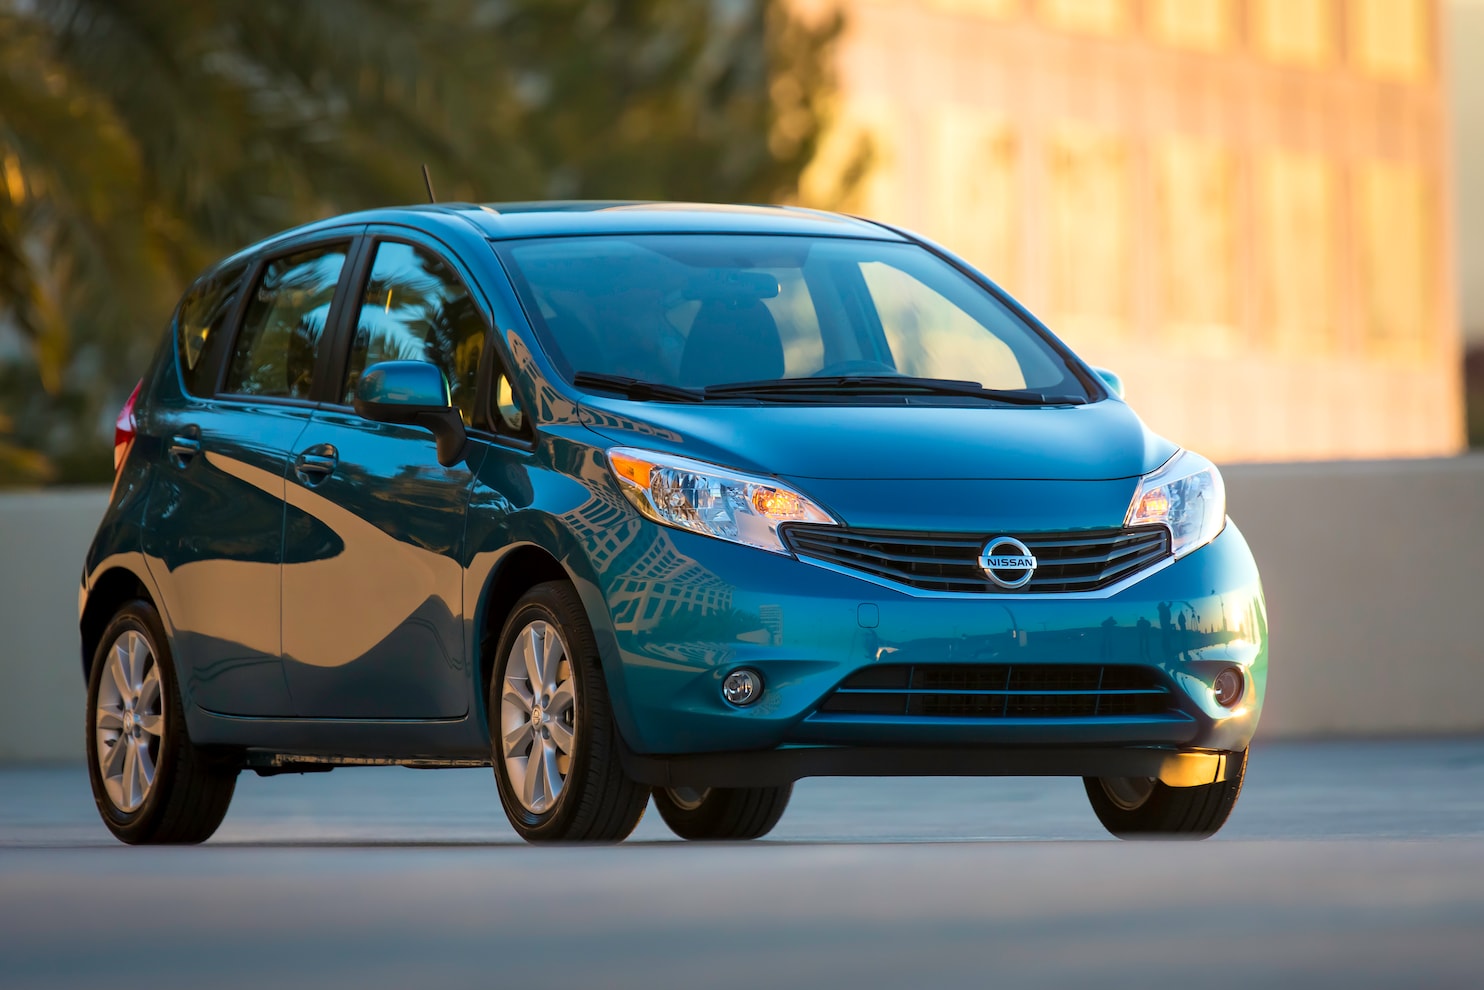 2014 Nissan Versa Note 1.6 S hatchback: Sensible and affordable? Yes.  Thrills? You get what you pay for. - The Washington Post